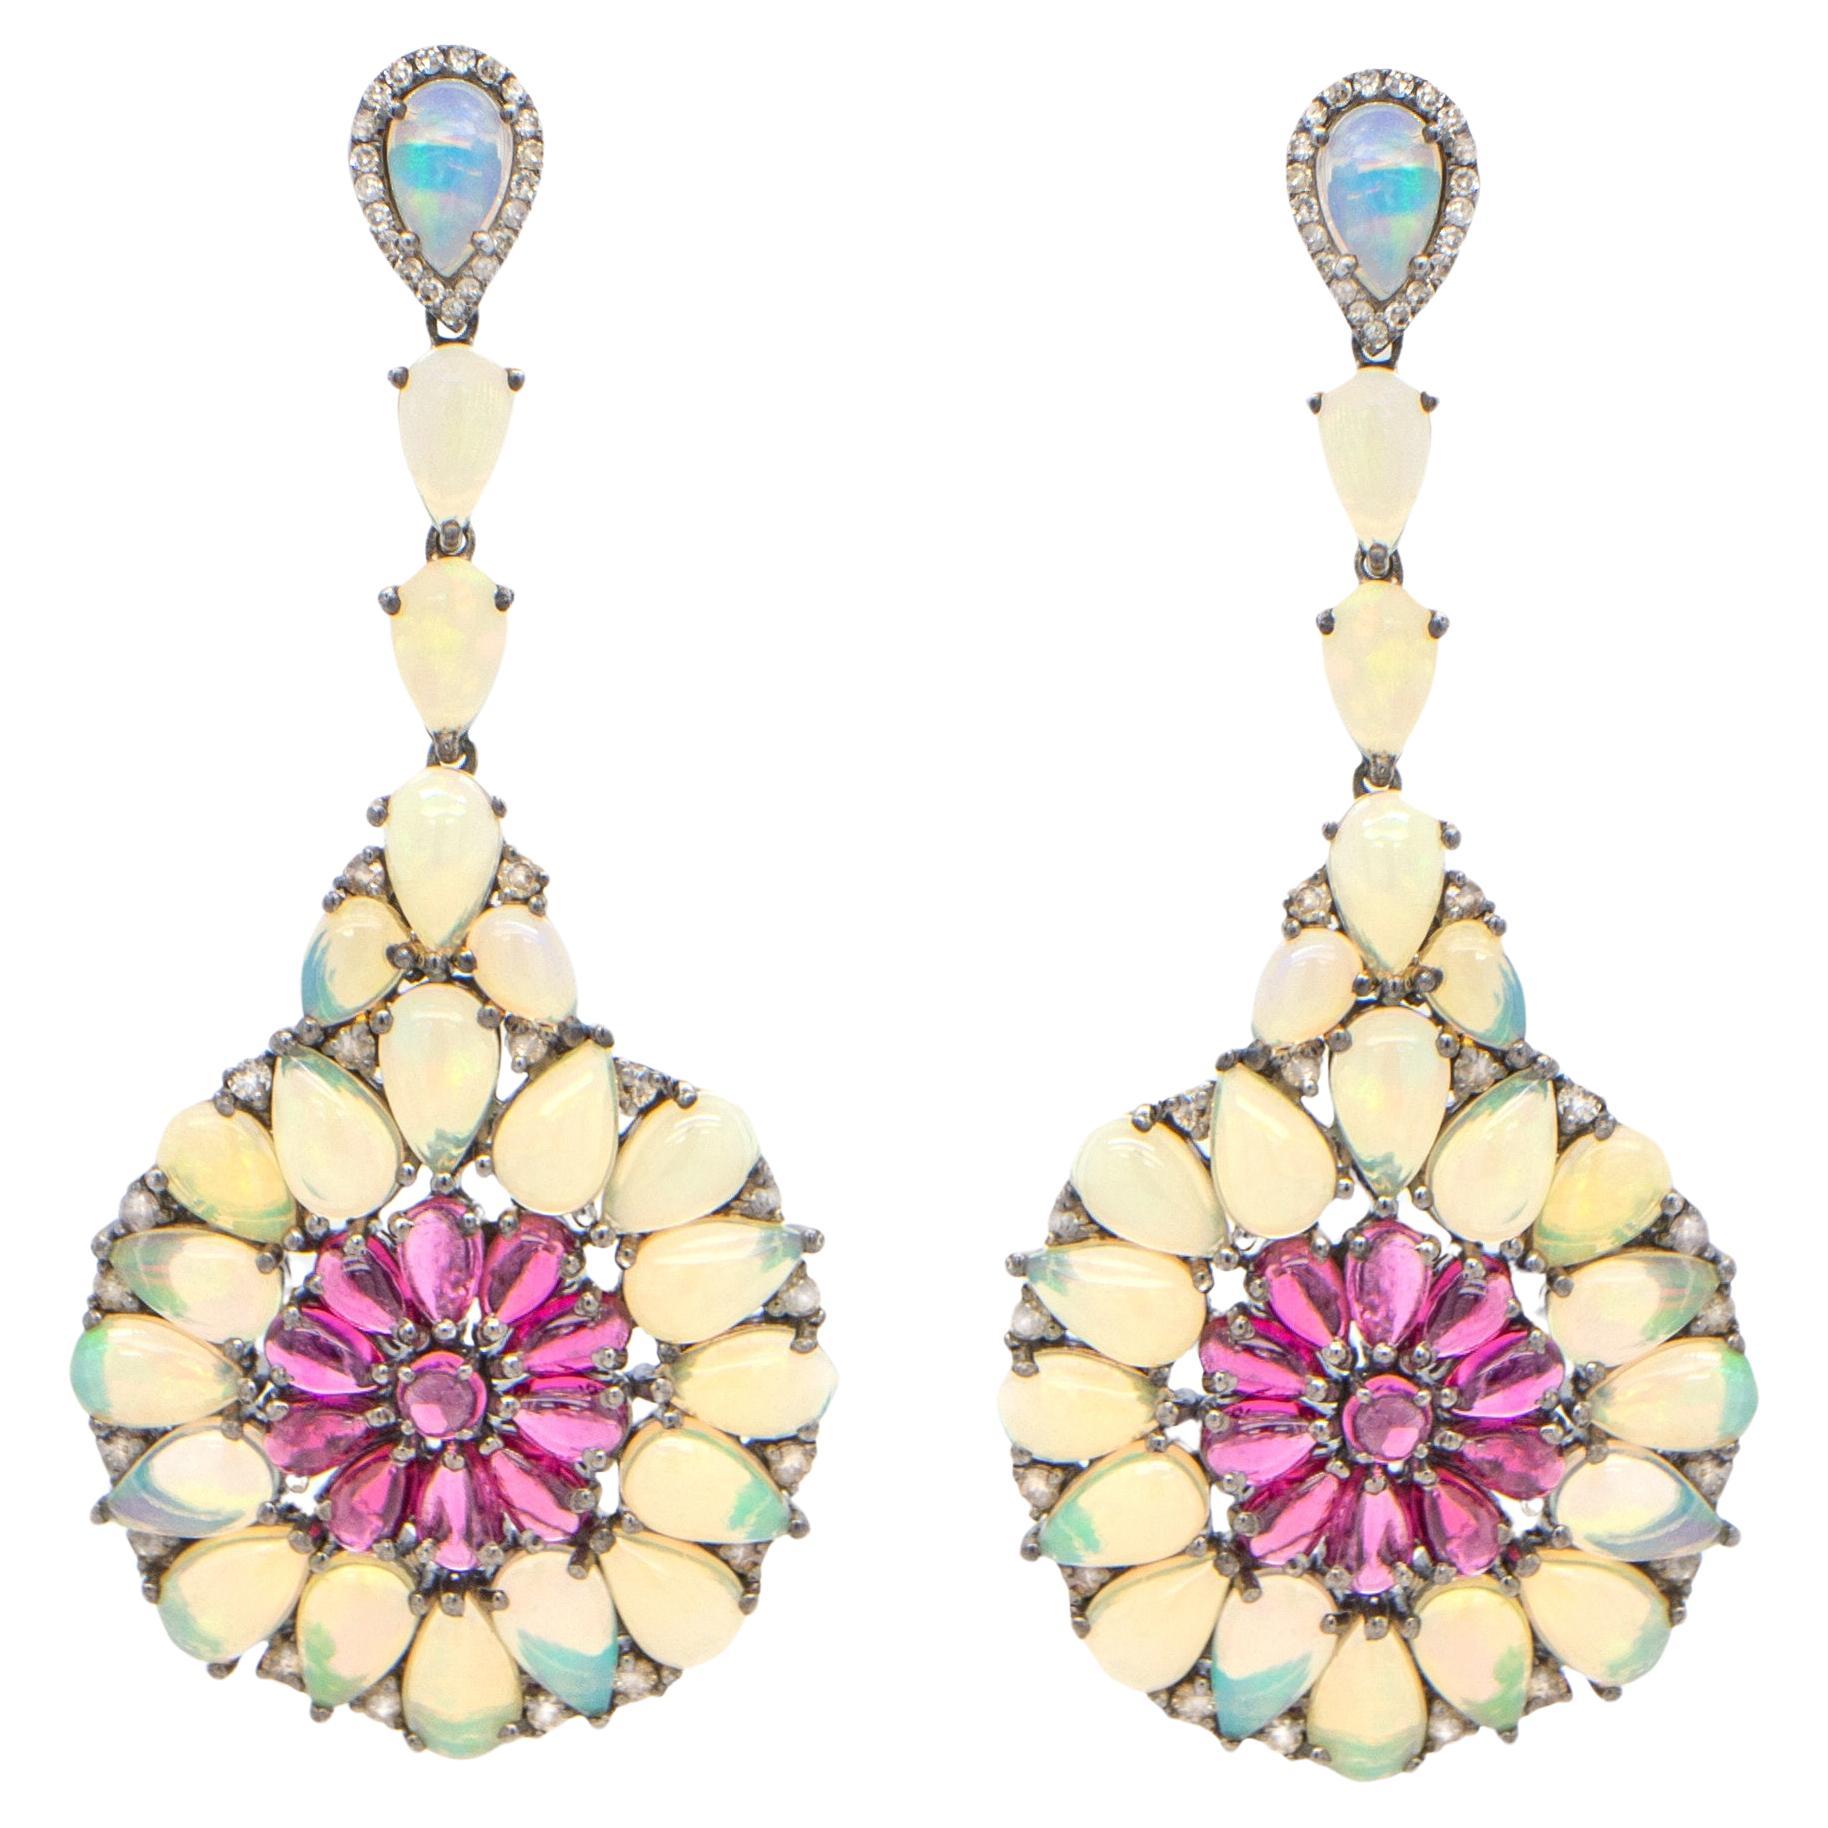 Opal and Diamond Earrings 30 Carats Total 14k Gold and Silver